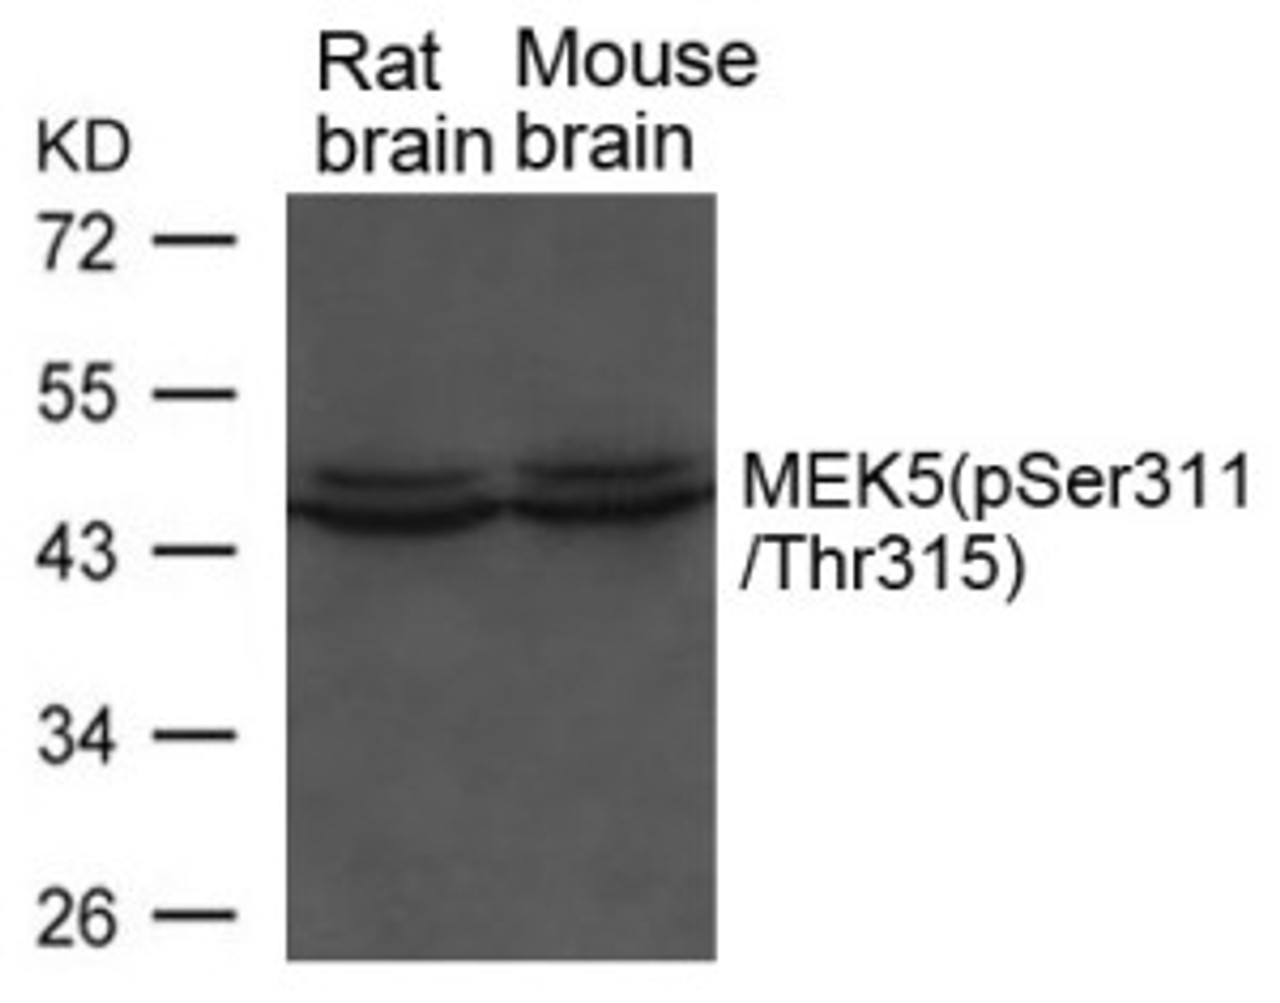 Western blot analysis of lysed extracts from Rat and Mouse brain tissue using MEK5 (phospho-Ser311/ Thr315) .